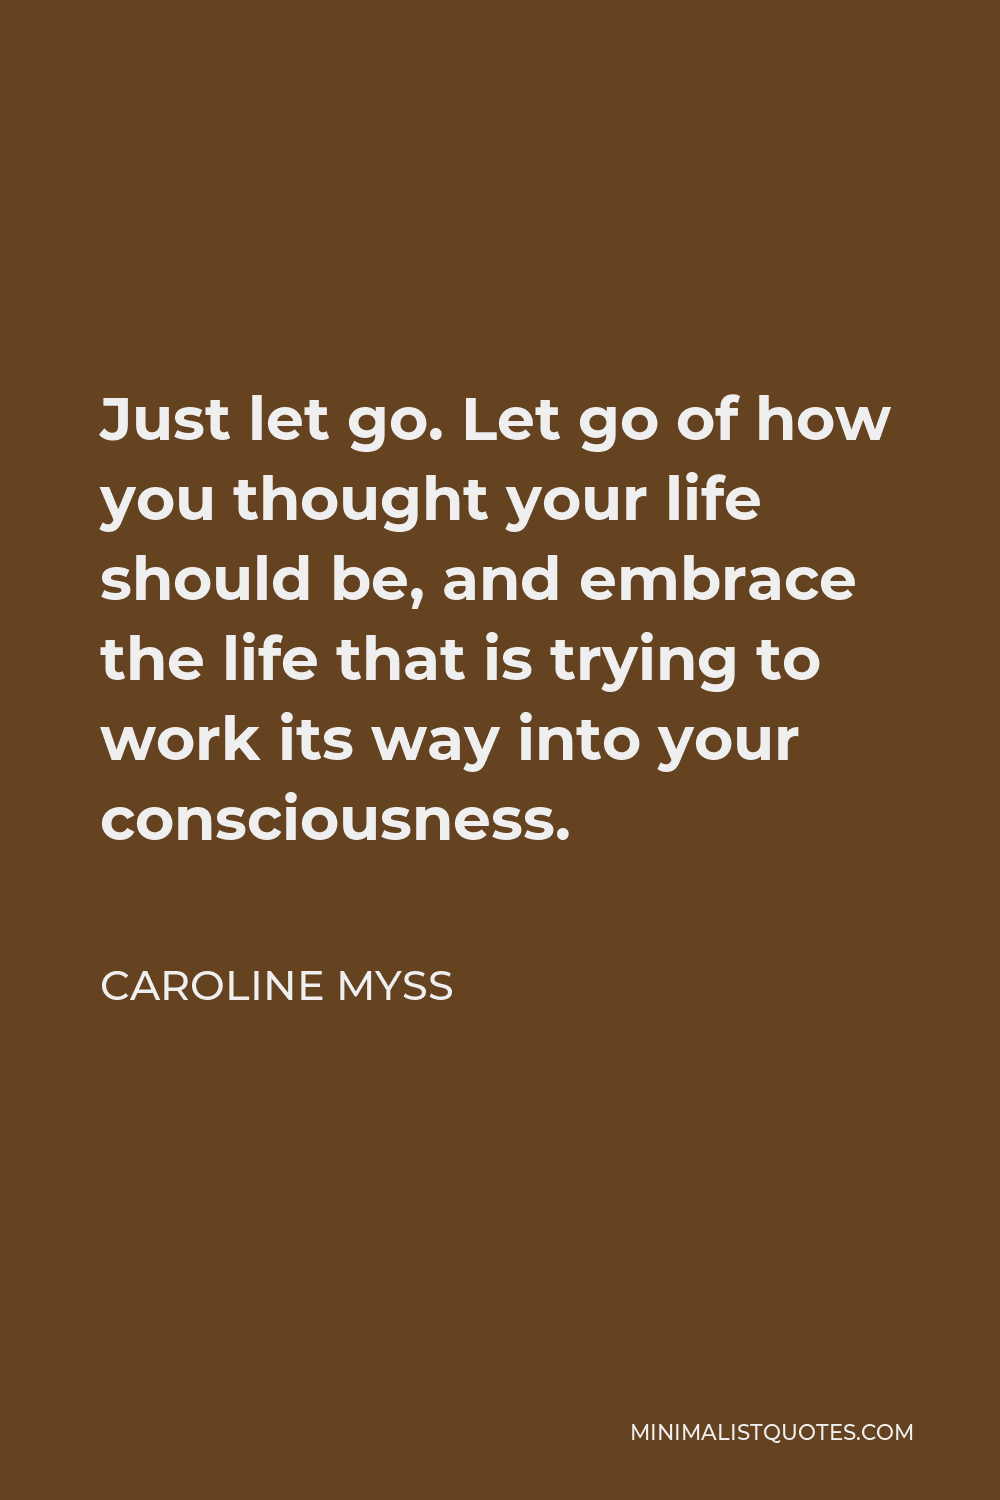 Caroline Myss Quote - Just let go. Let go of how you thought your life should be, and embrace the life that is trying to work its way into your consciousness.